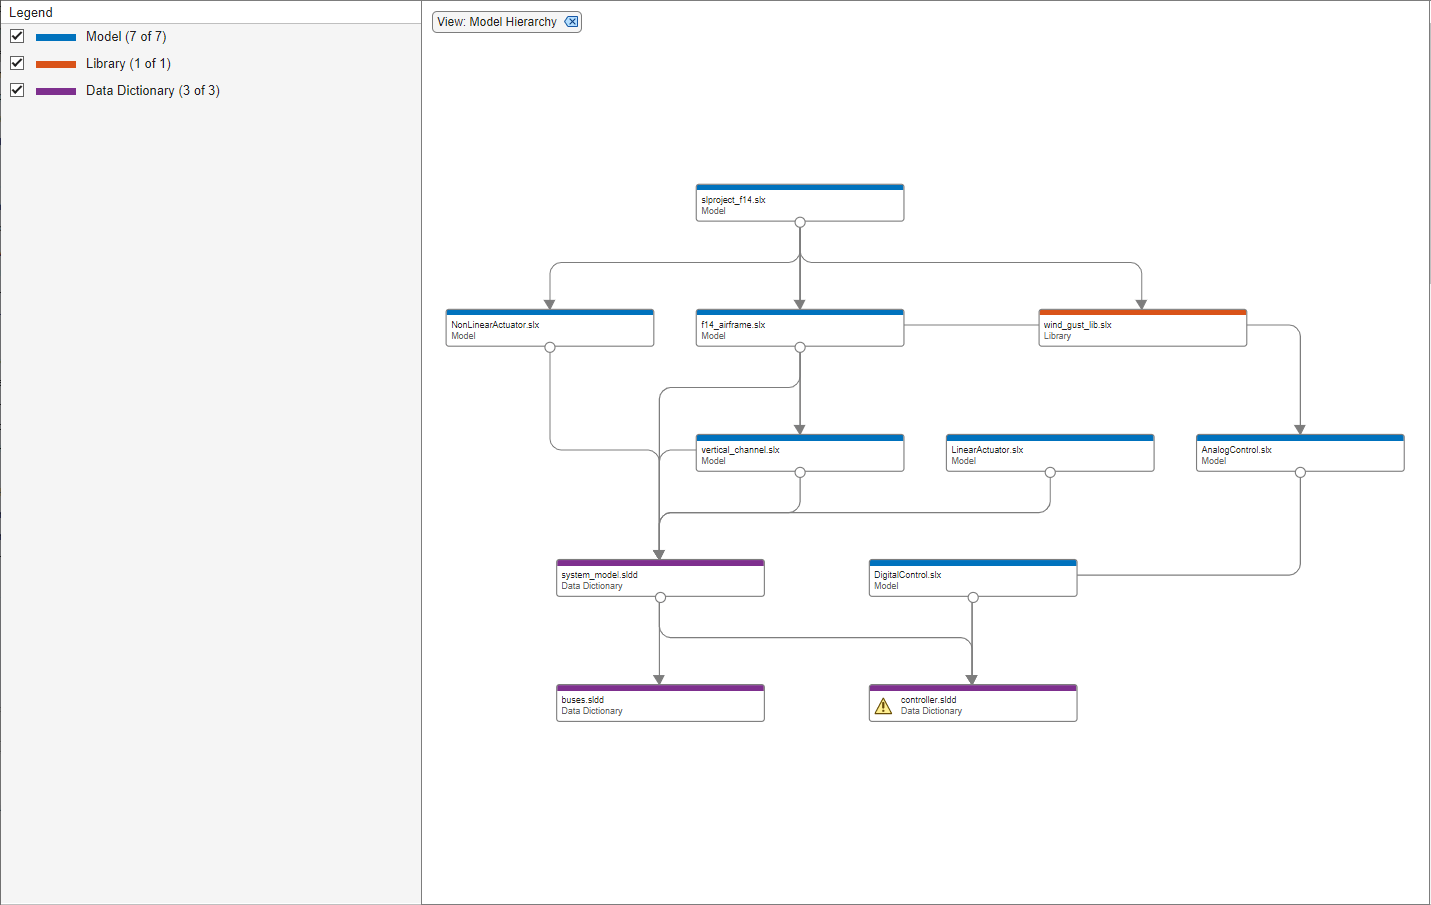 Dependency graph with Model Hierarchy filter applied. On the left, the Legend panel displays the type of the file (model, library, subsystem, data dictionary, protected model.